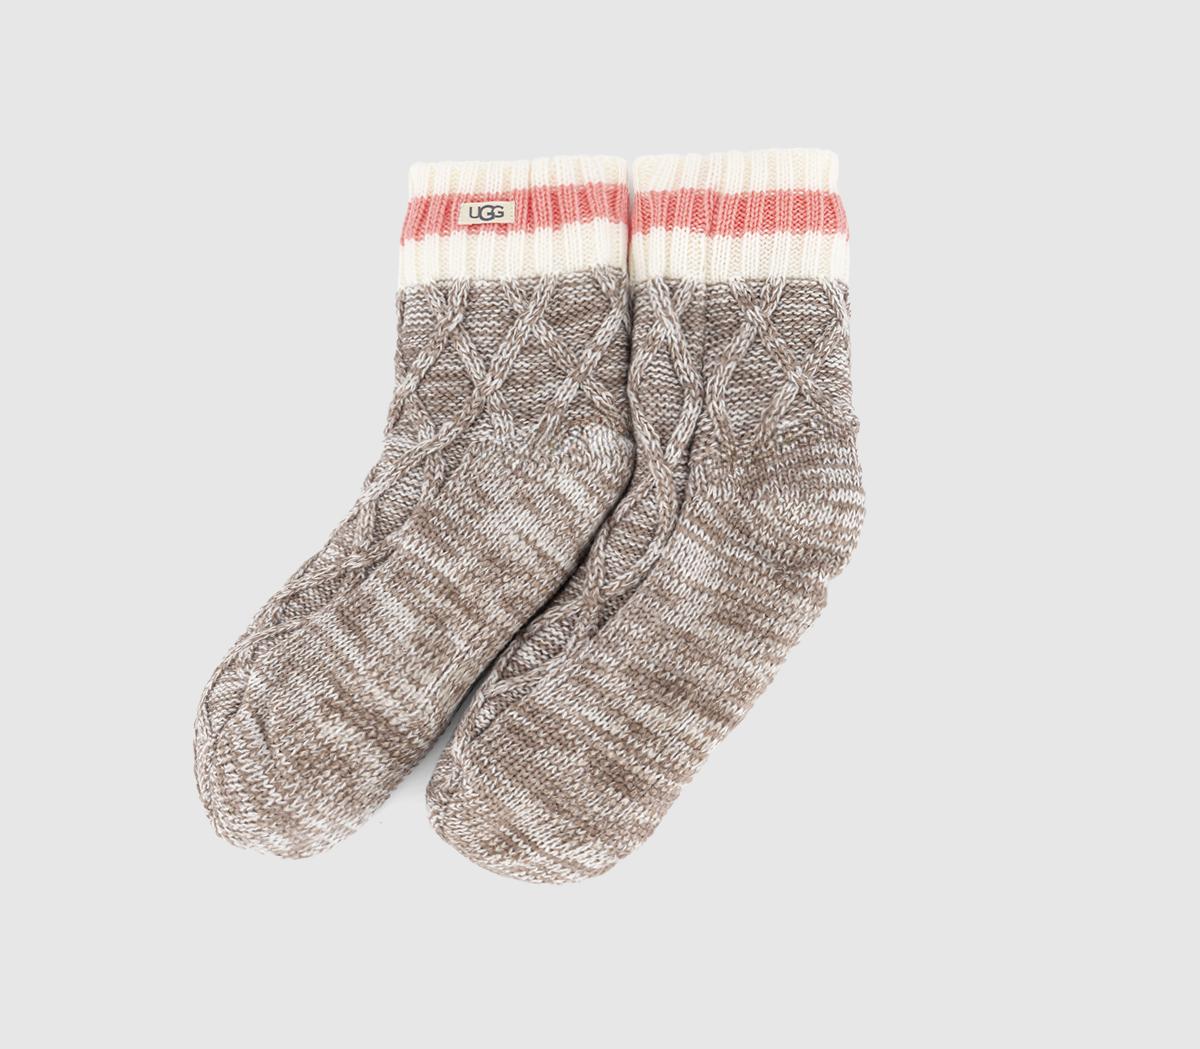 UGG Deedee Fleece Lined Quarter Socks All Spice Pink Coral, One Size